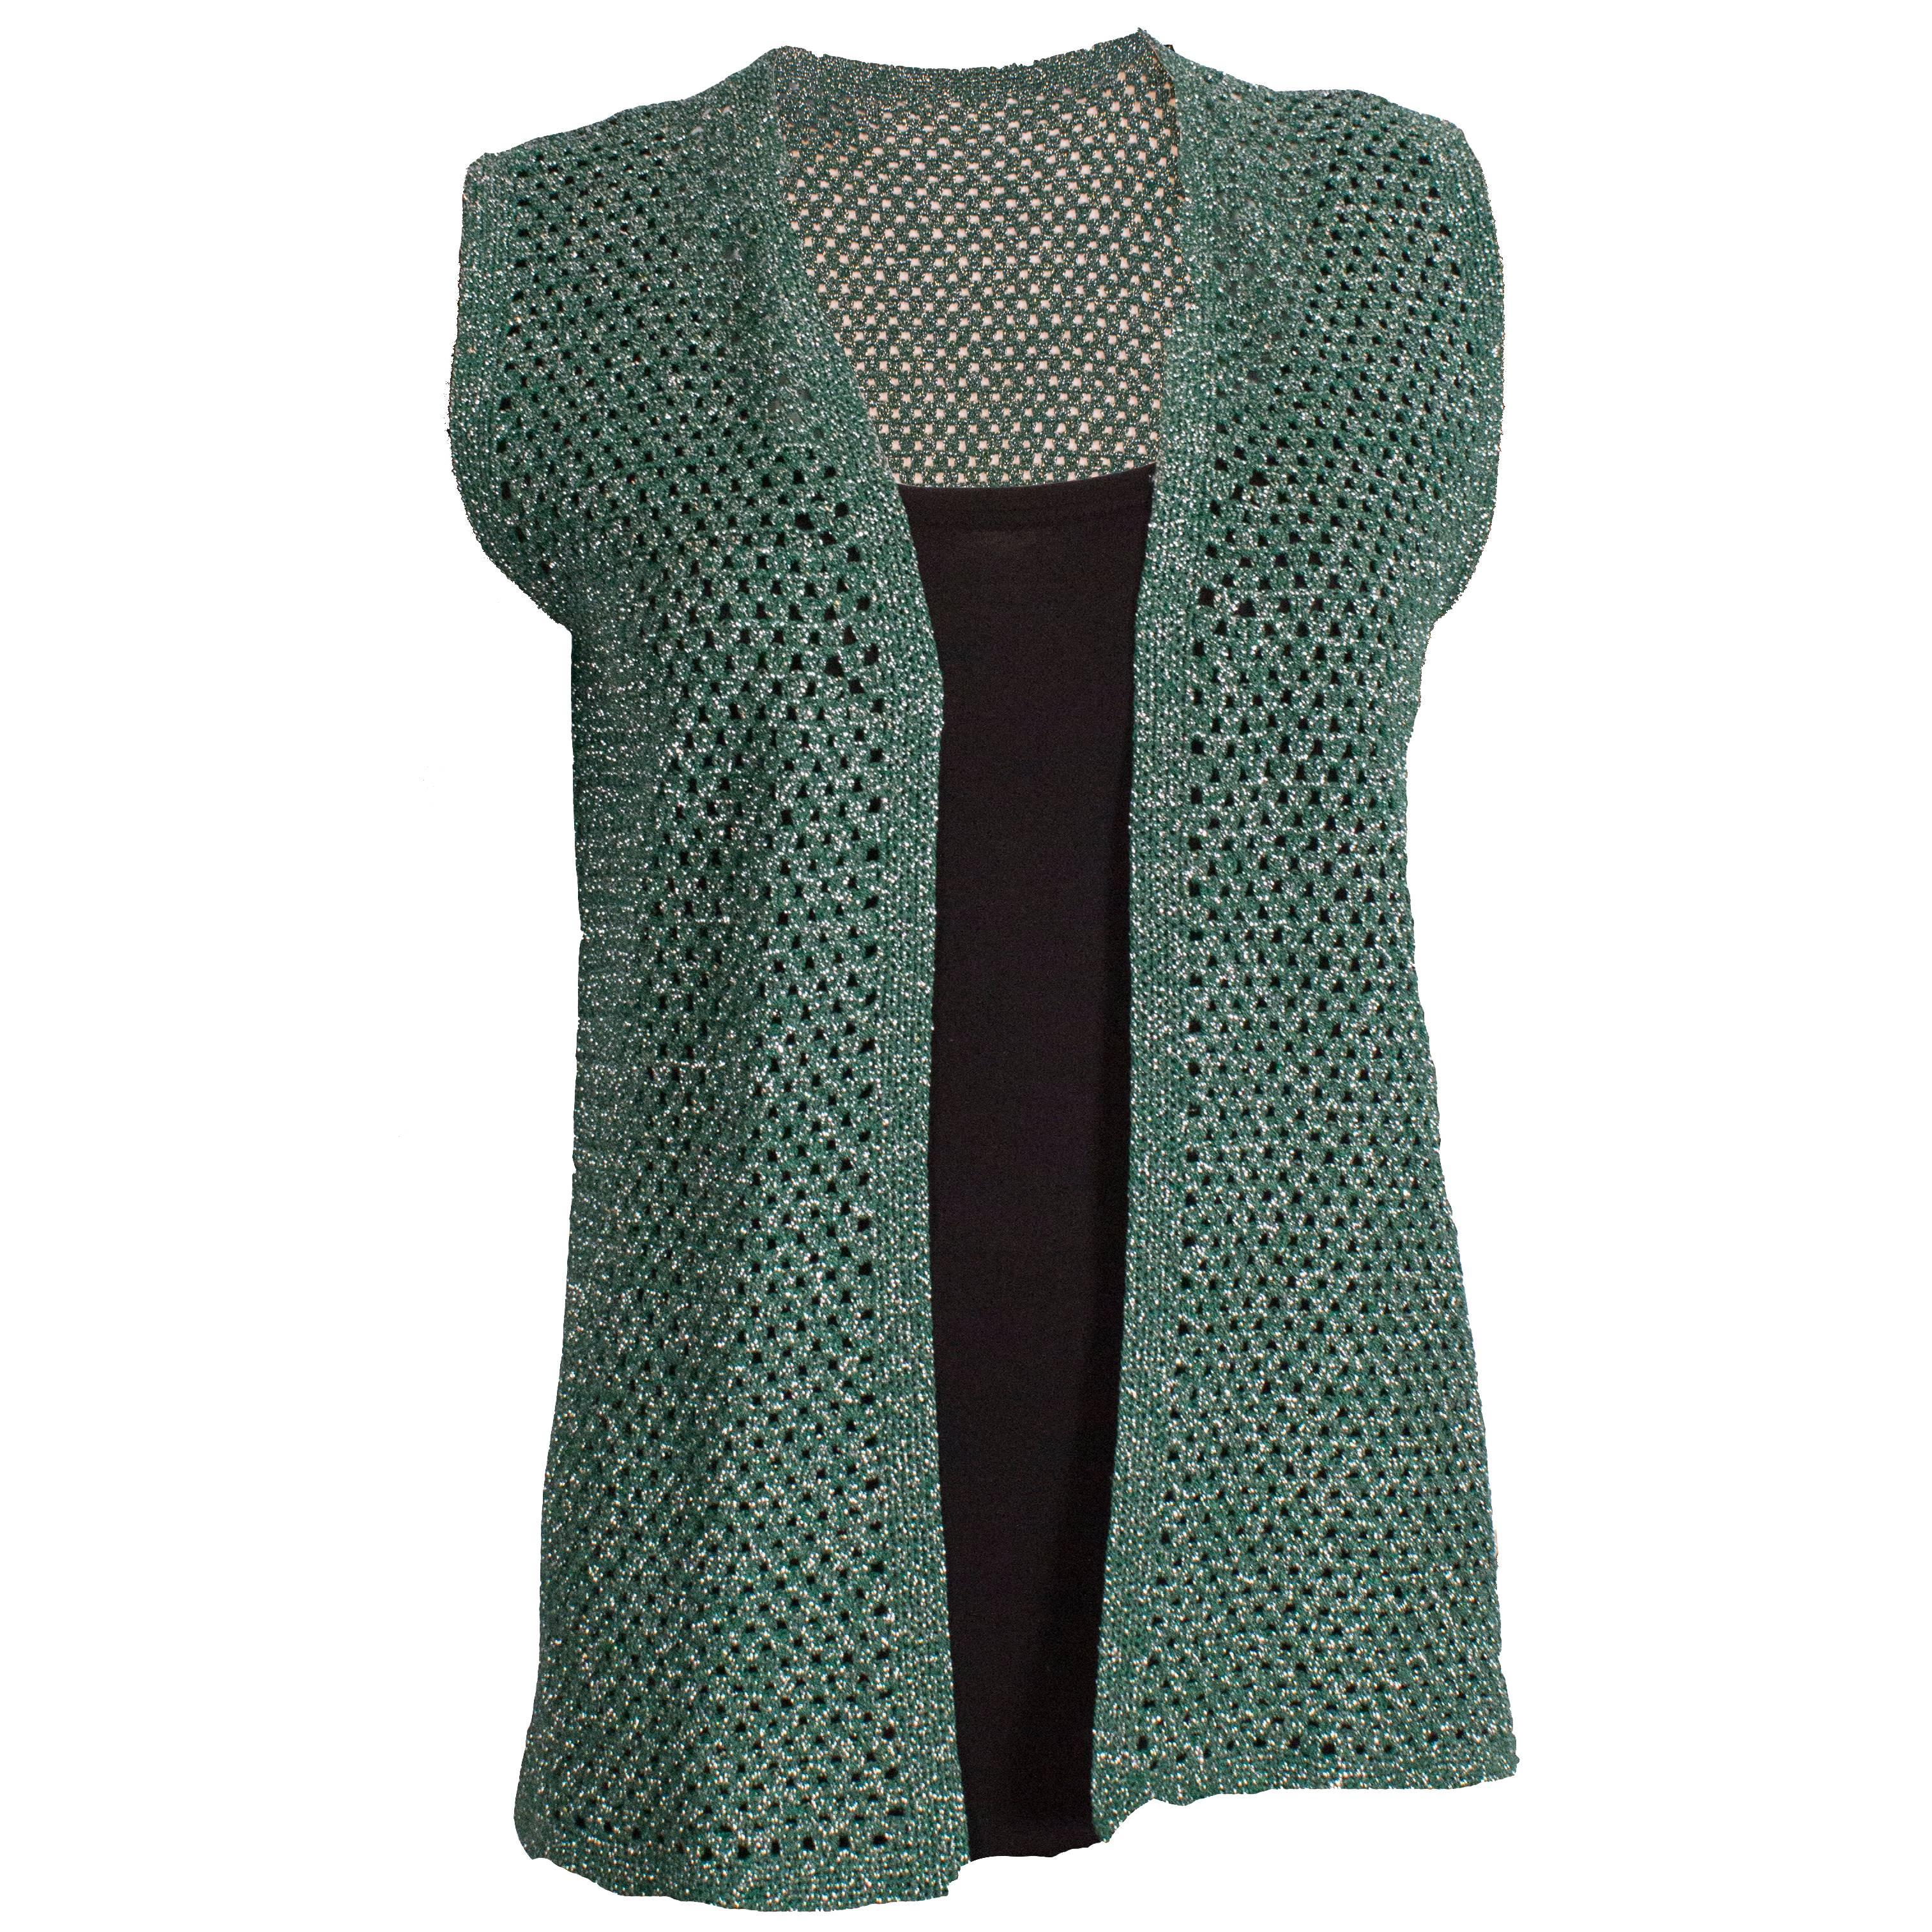 Green and Silver Crochet Gilet